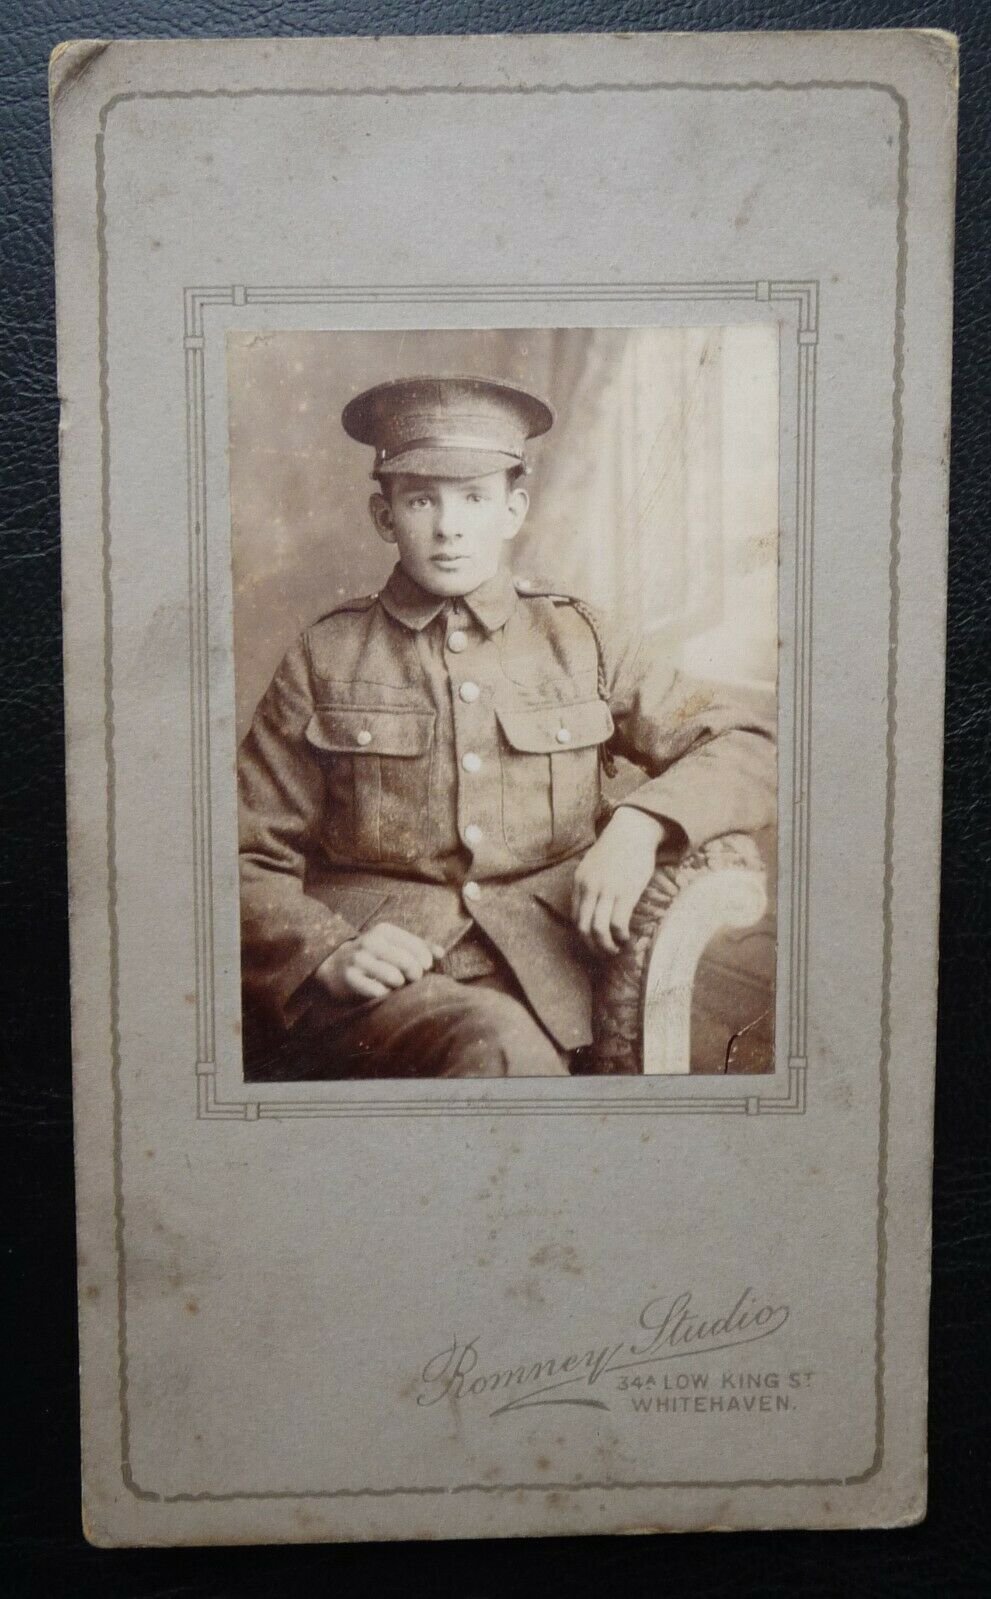 House Clearance - NEW BRITISH ARMY RECRUIT. WW1 REAL PHOTO CABINET CARD WHITEHAVEN PHOTOGRAPHER